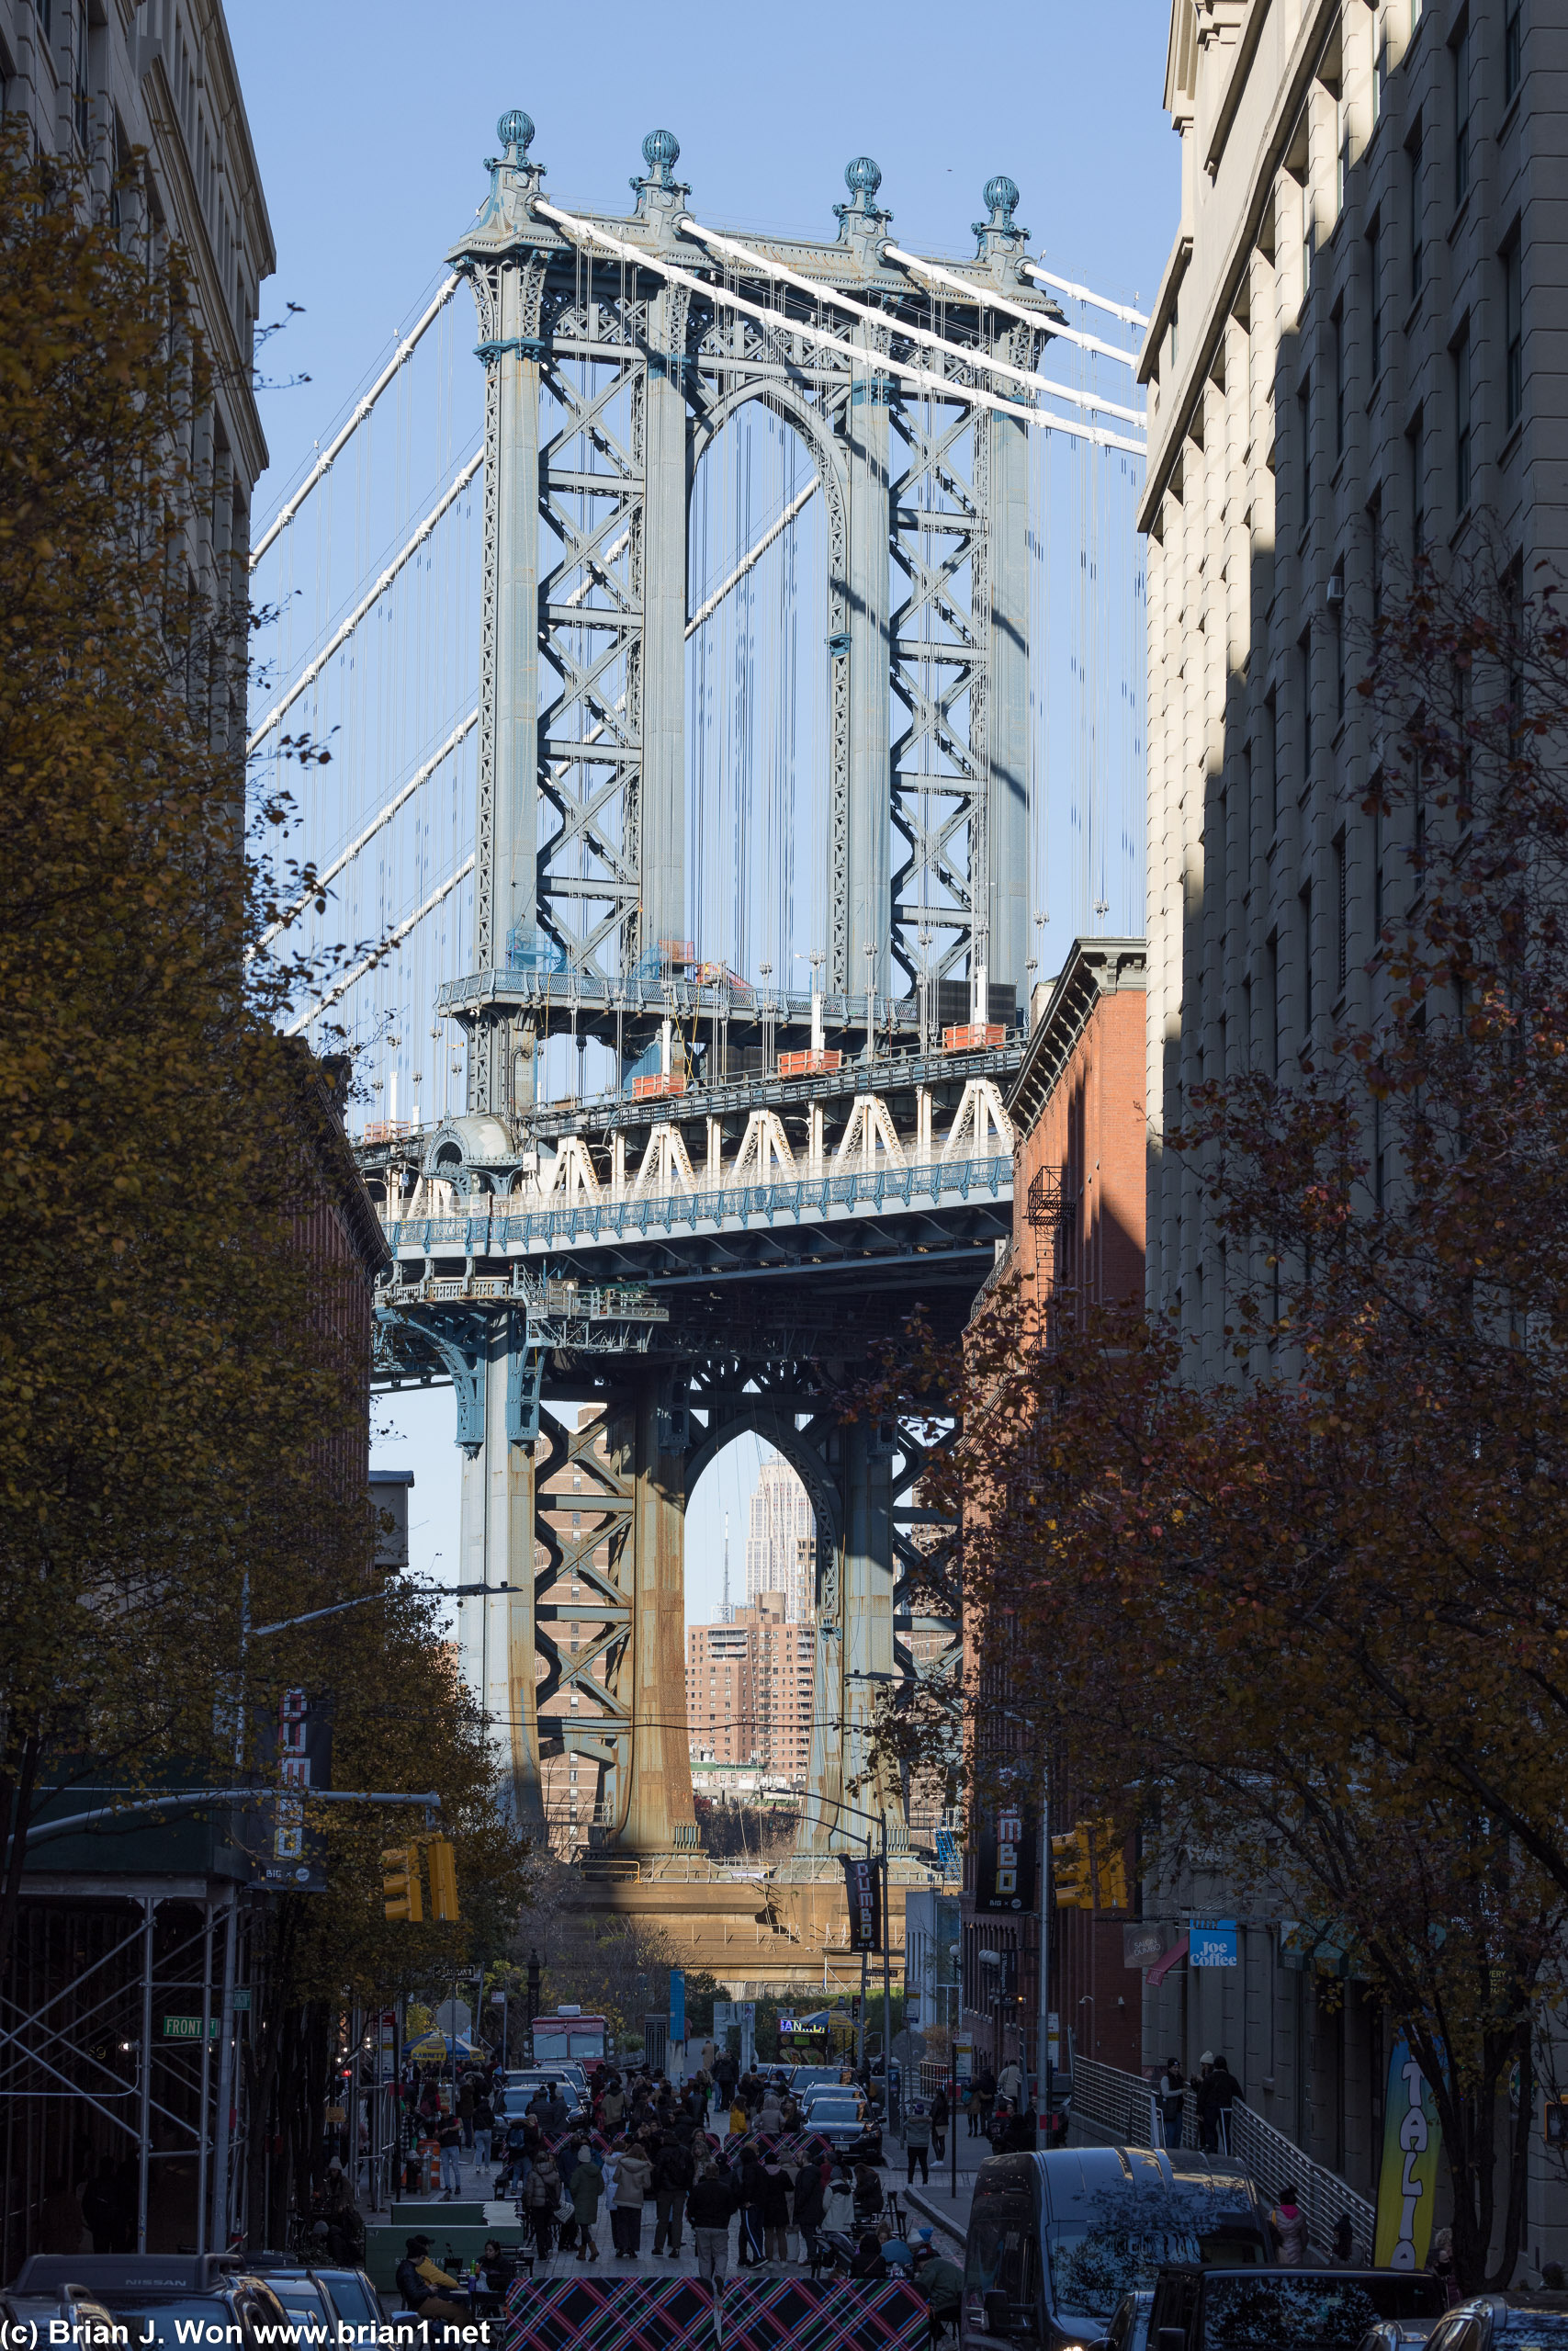 Perhaps the most famous view of the Manhattan Bridge.